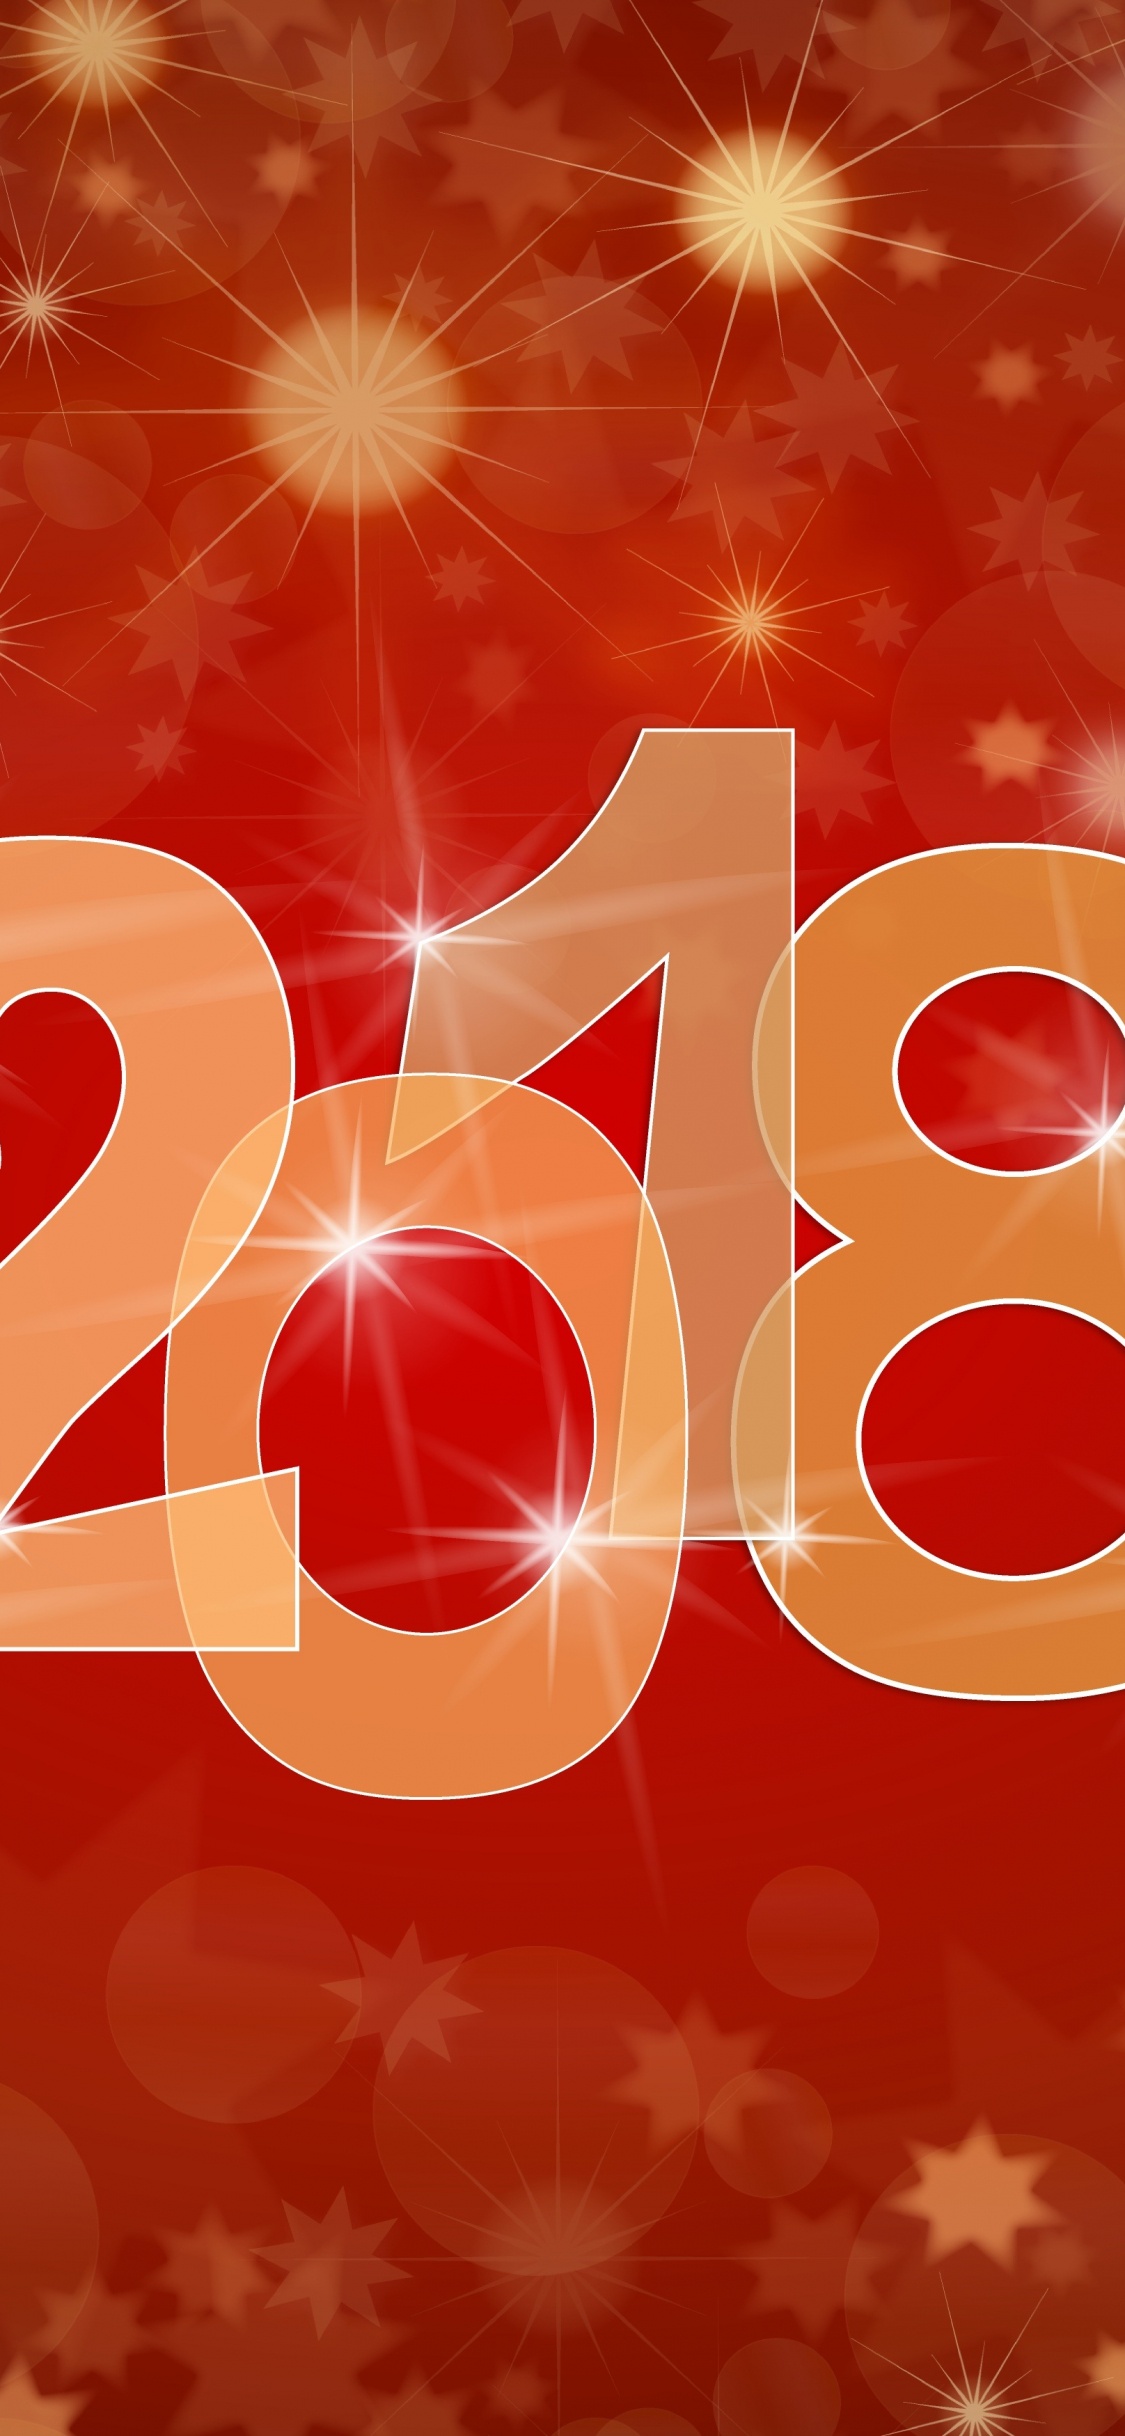 New Year, Chinese New Year, Text, Heart, New Years Day. Wallpaper in 1125x2436 Resolution